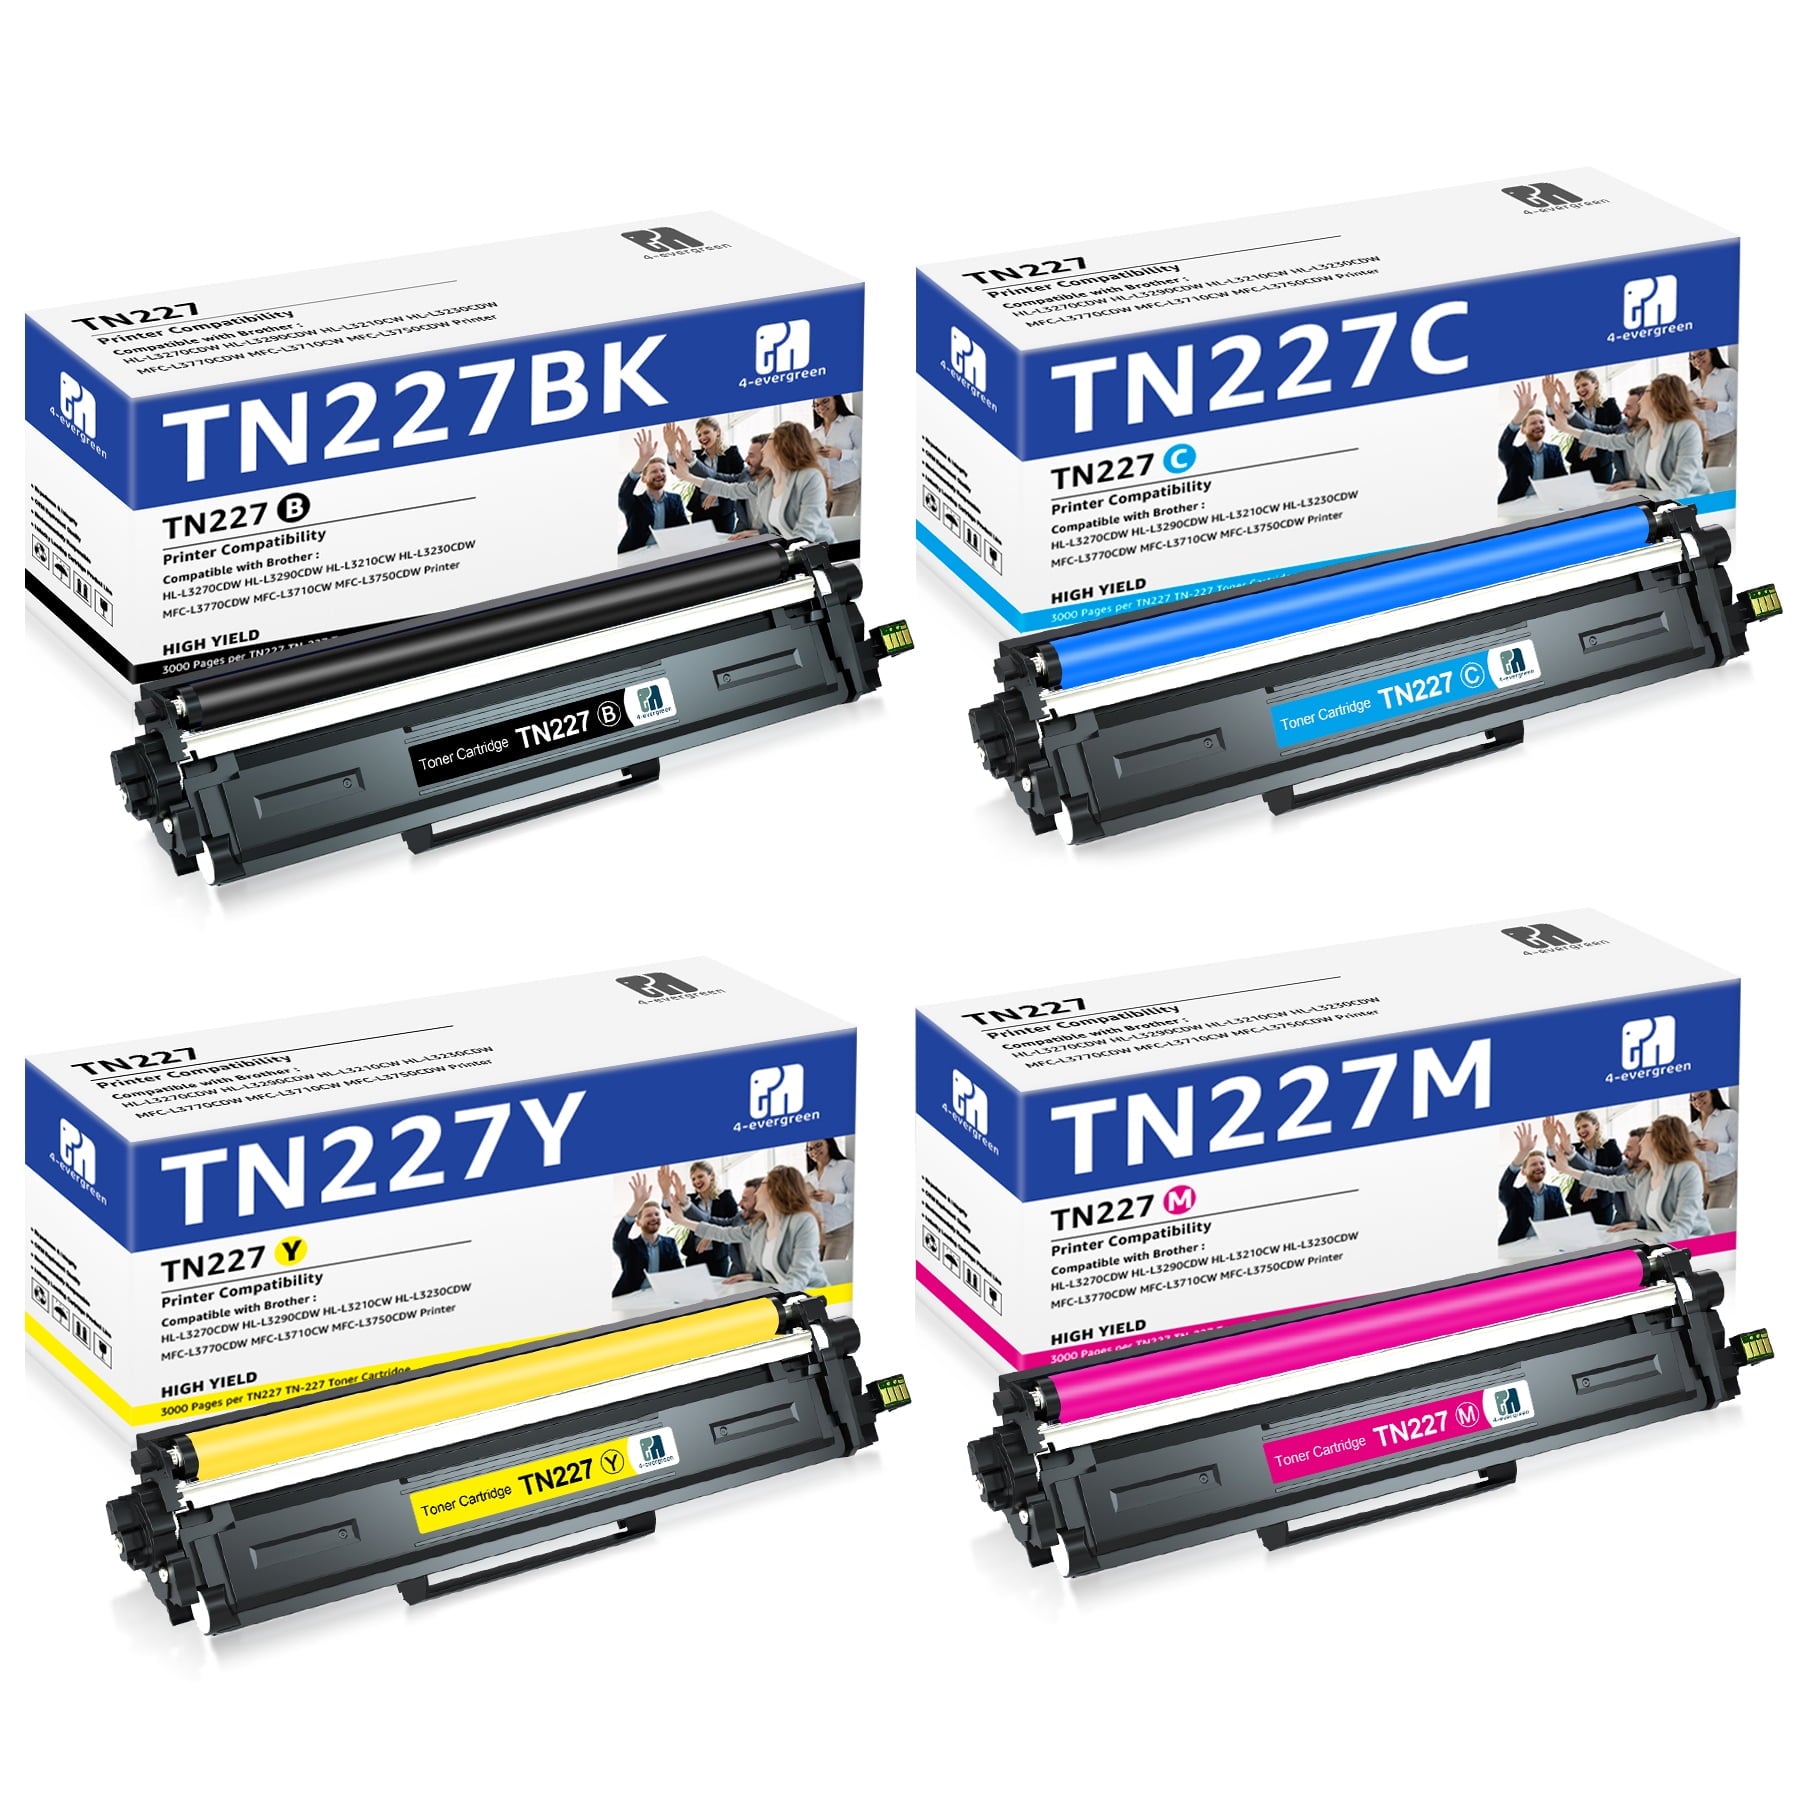 TN227 Toner Cartridge Replacement for Brother Printer High Yield (4 Pack TN-223BK/C/M/Y )